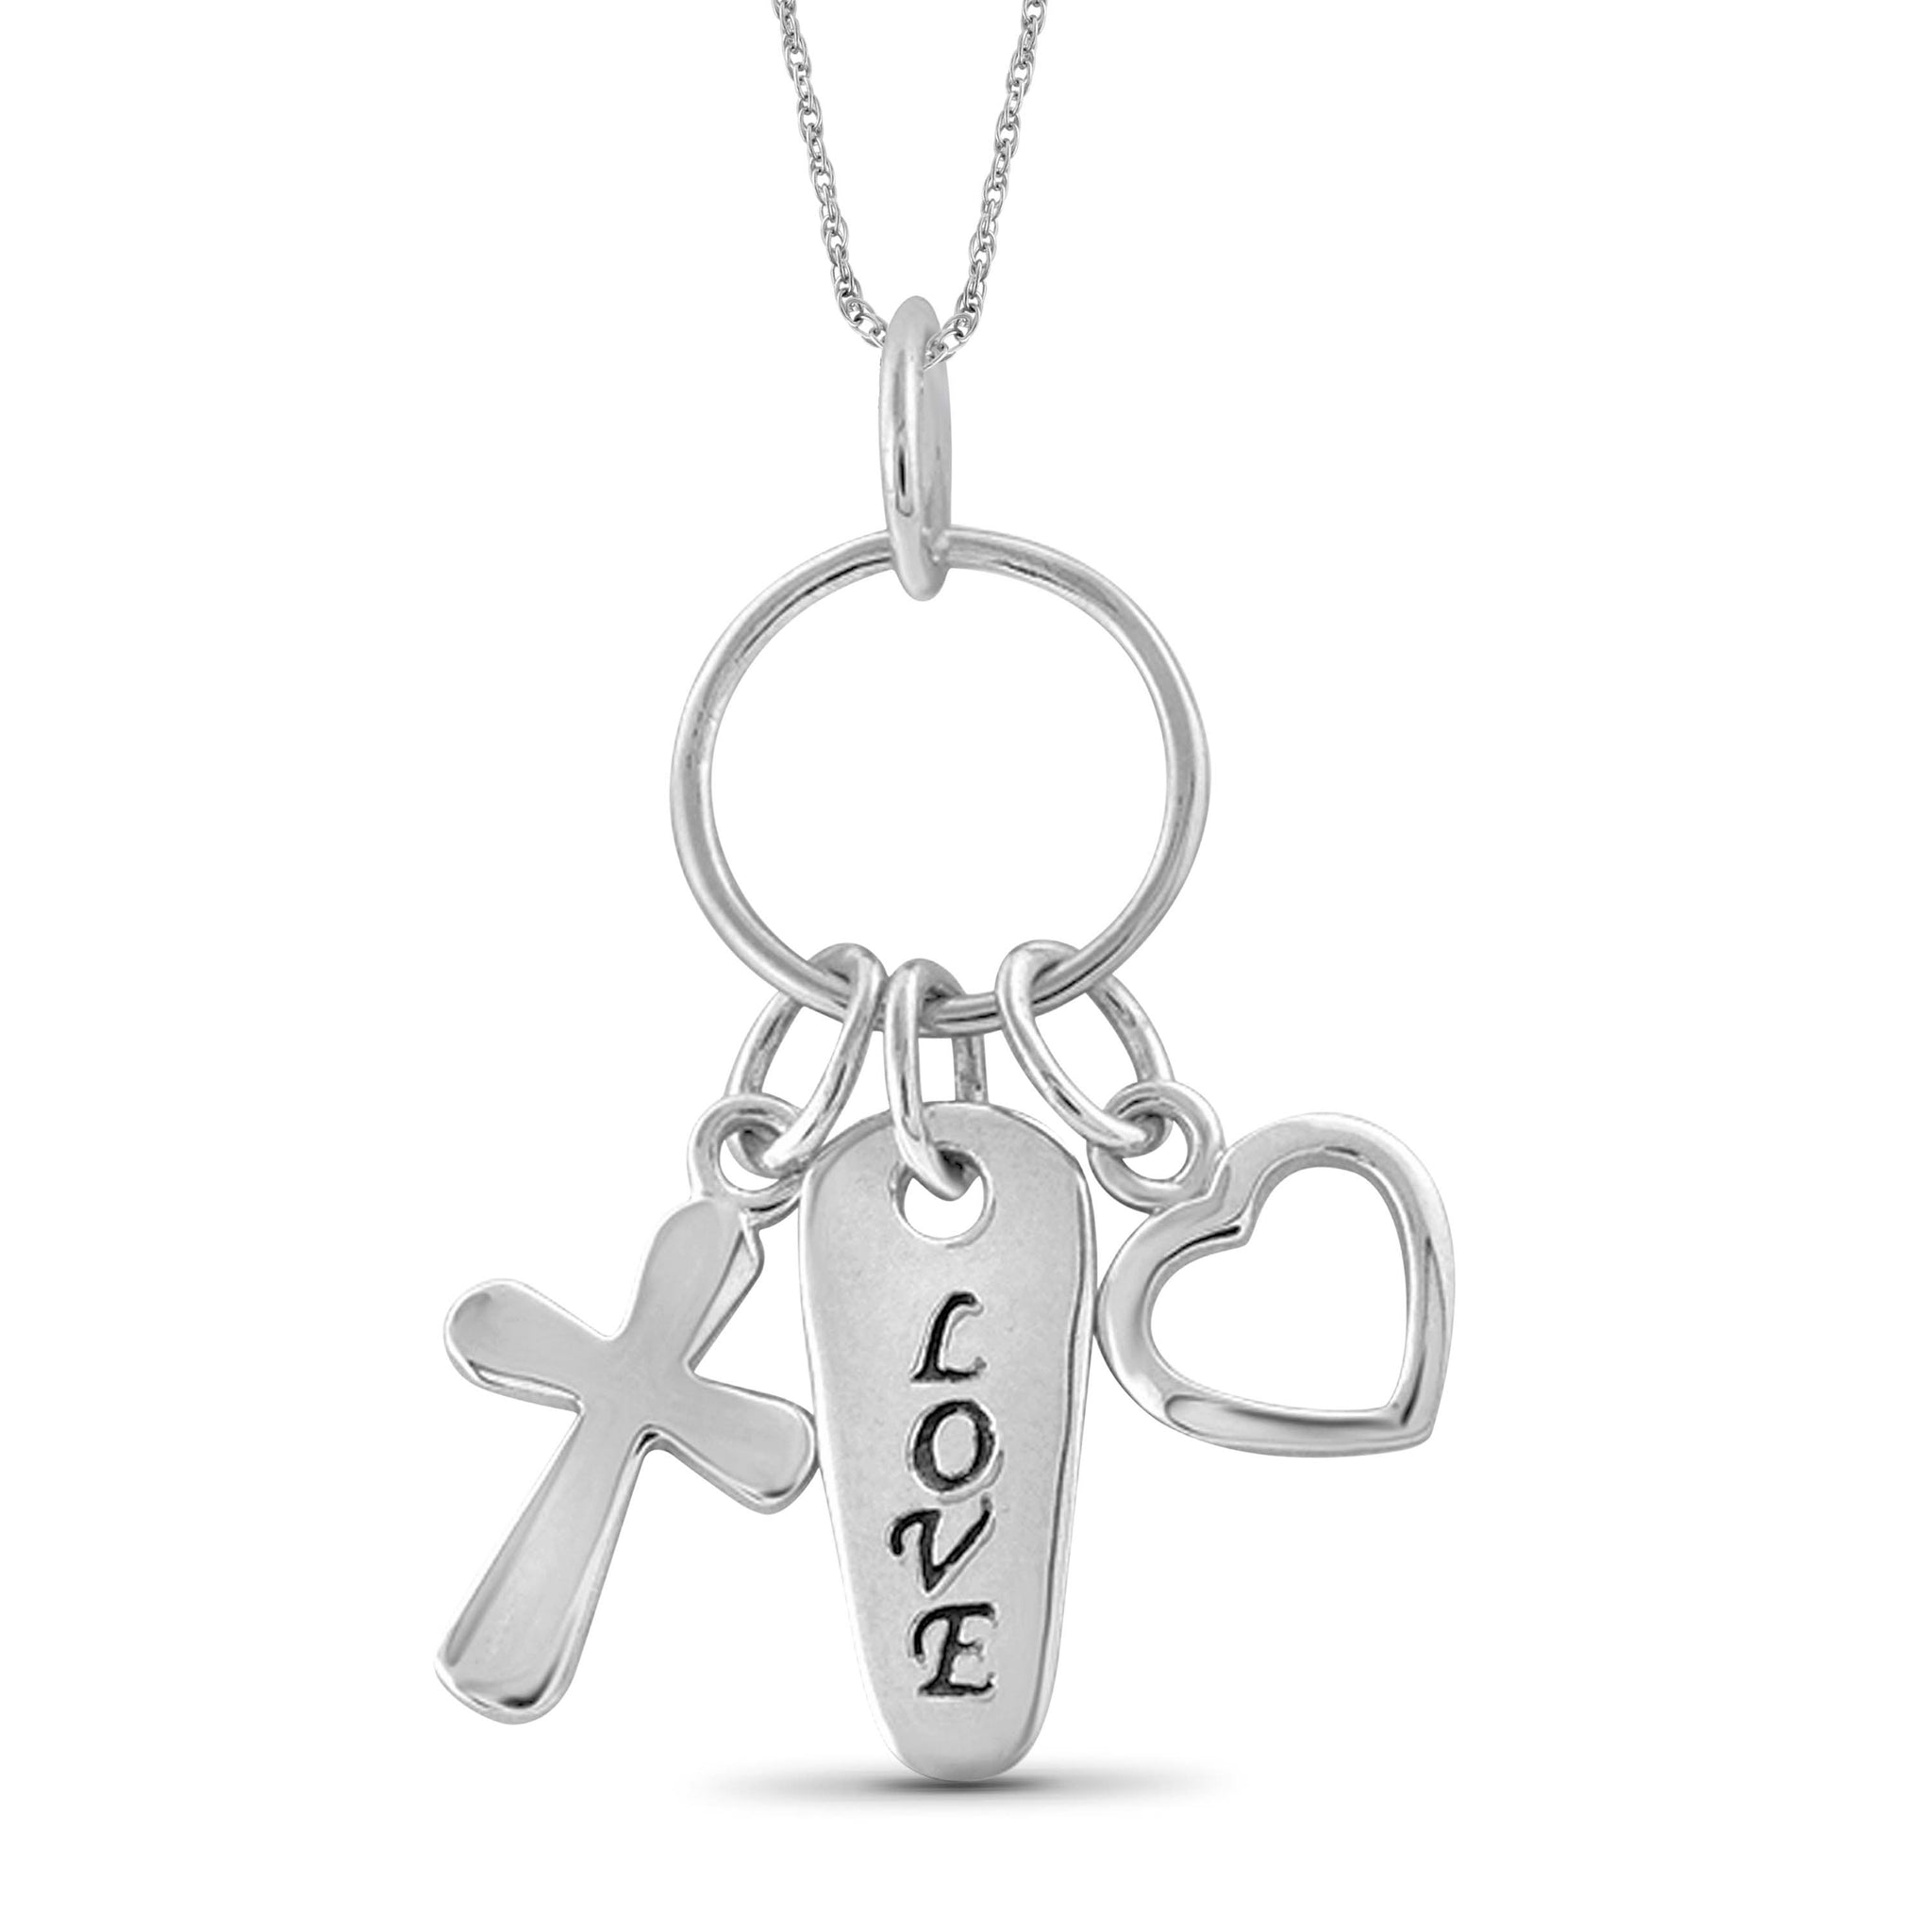 JewelonFire Sterling Silver "LOVE" Engraved Charm Pendant